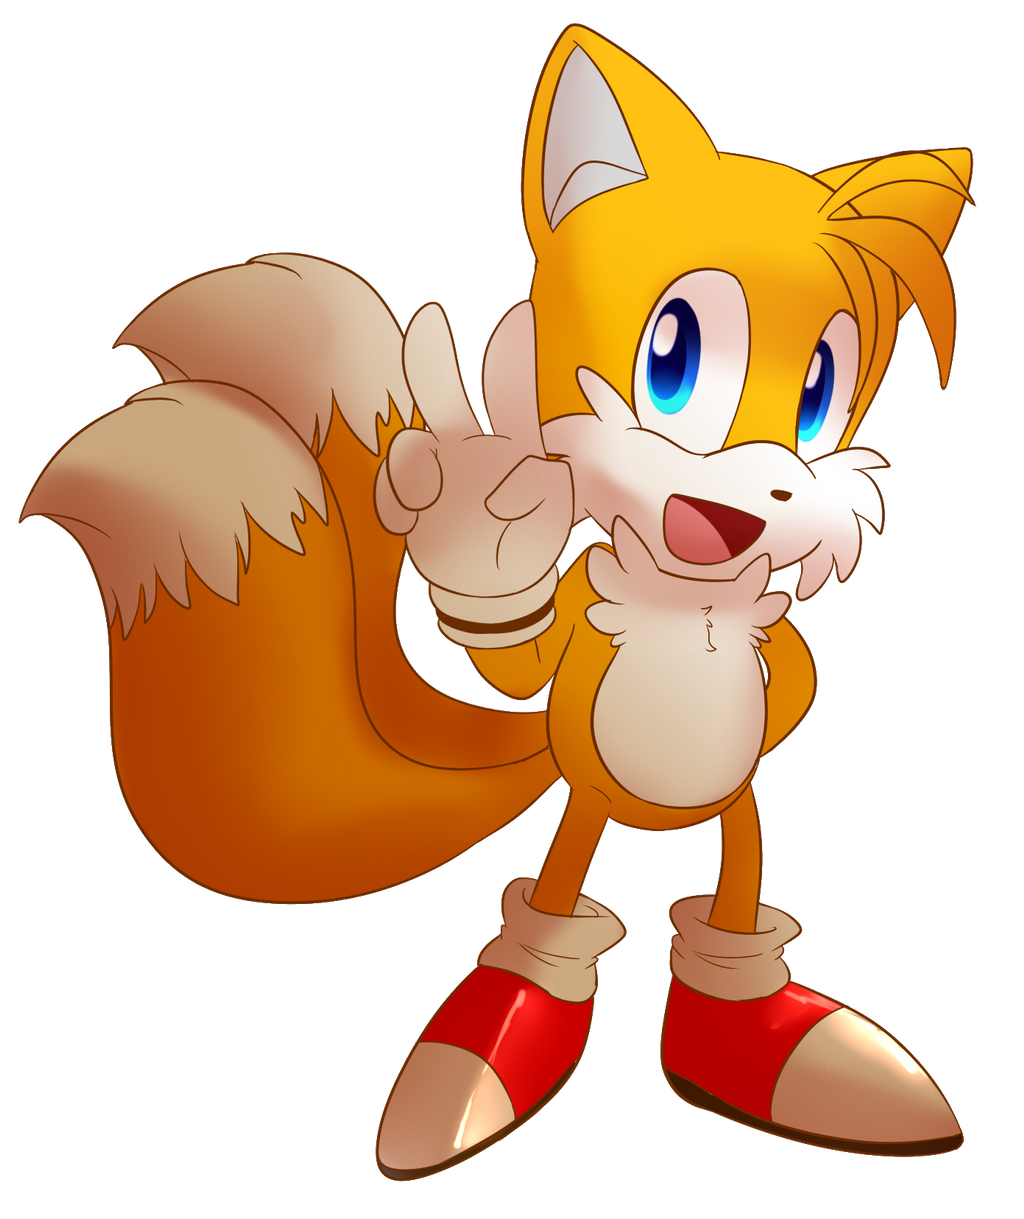 Tails SVG by rosyfan12 on DeviantArt